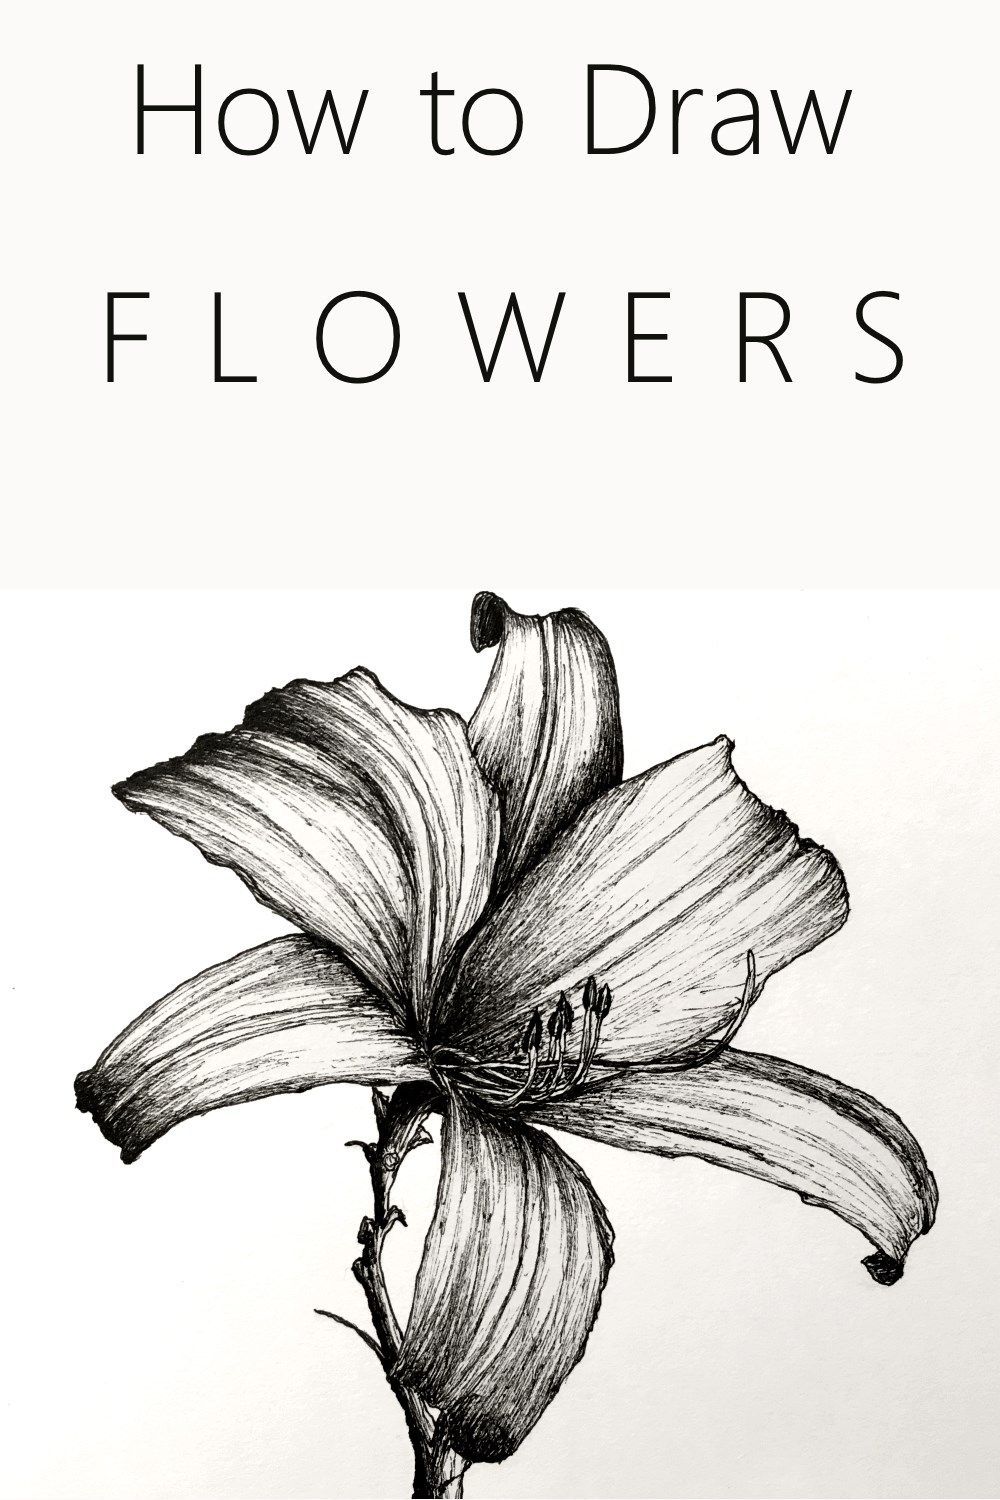 How to Draw Flowers - How to Draw Flowers -   18 beauty Art flowers ideas